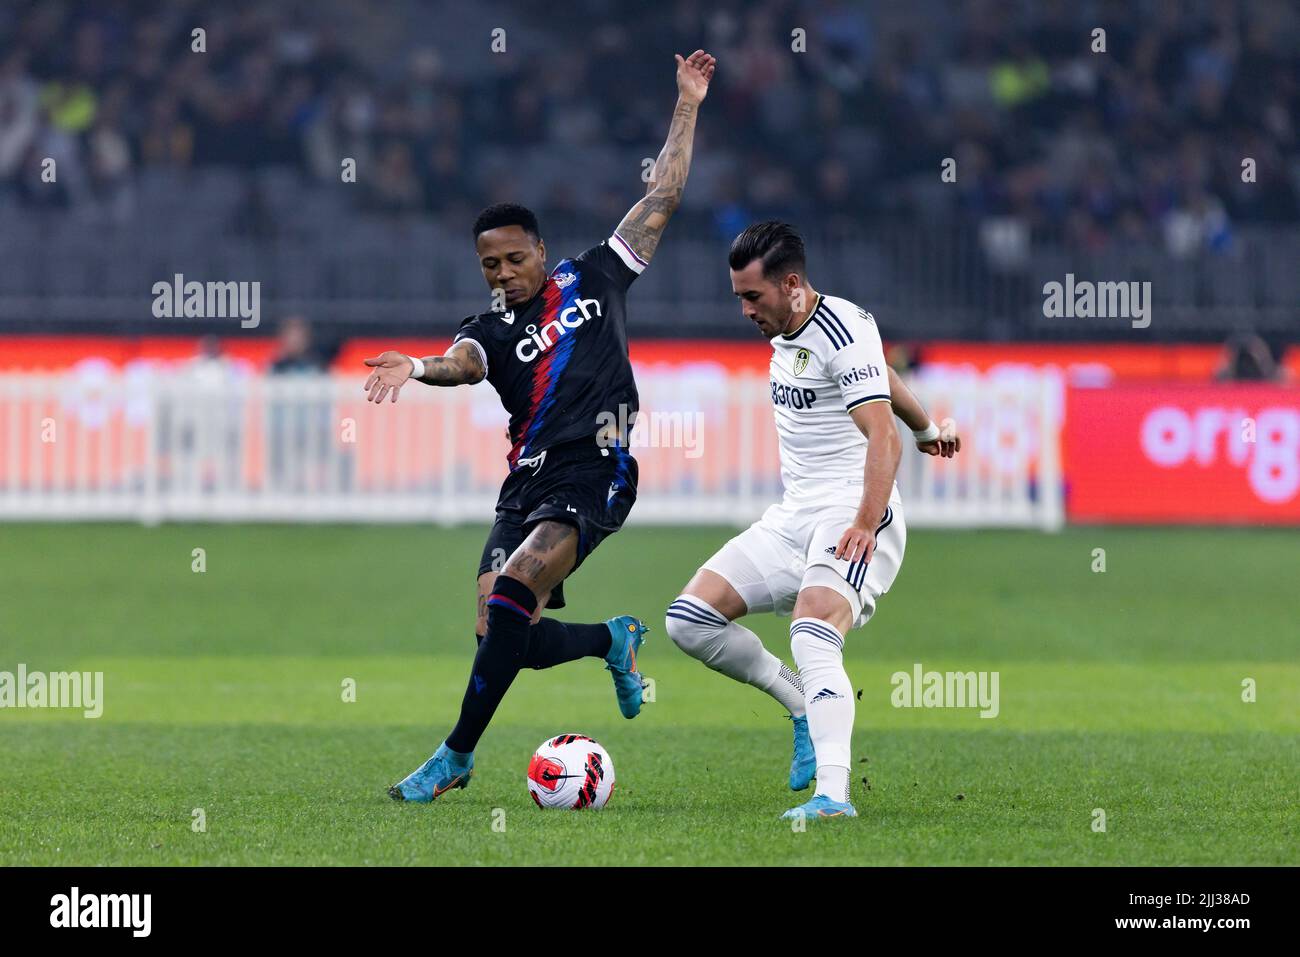 Perth, Australia, 22 July, 2022. Nathaniel Clyne of Crystal Palace is tackled by Jack Harrison of Leeds United during the ICON Festival of International Football match between Crystal Palace and Leeds United at Optus Stadium on July 22, 2022 in Perth, Australia. Credit: Graham Conaty/Speed Media/Alamy Live News Stock Photo